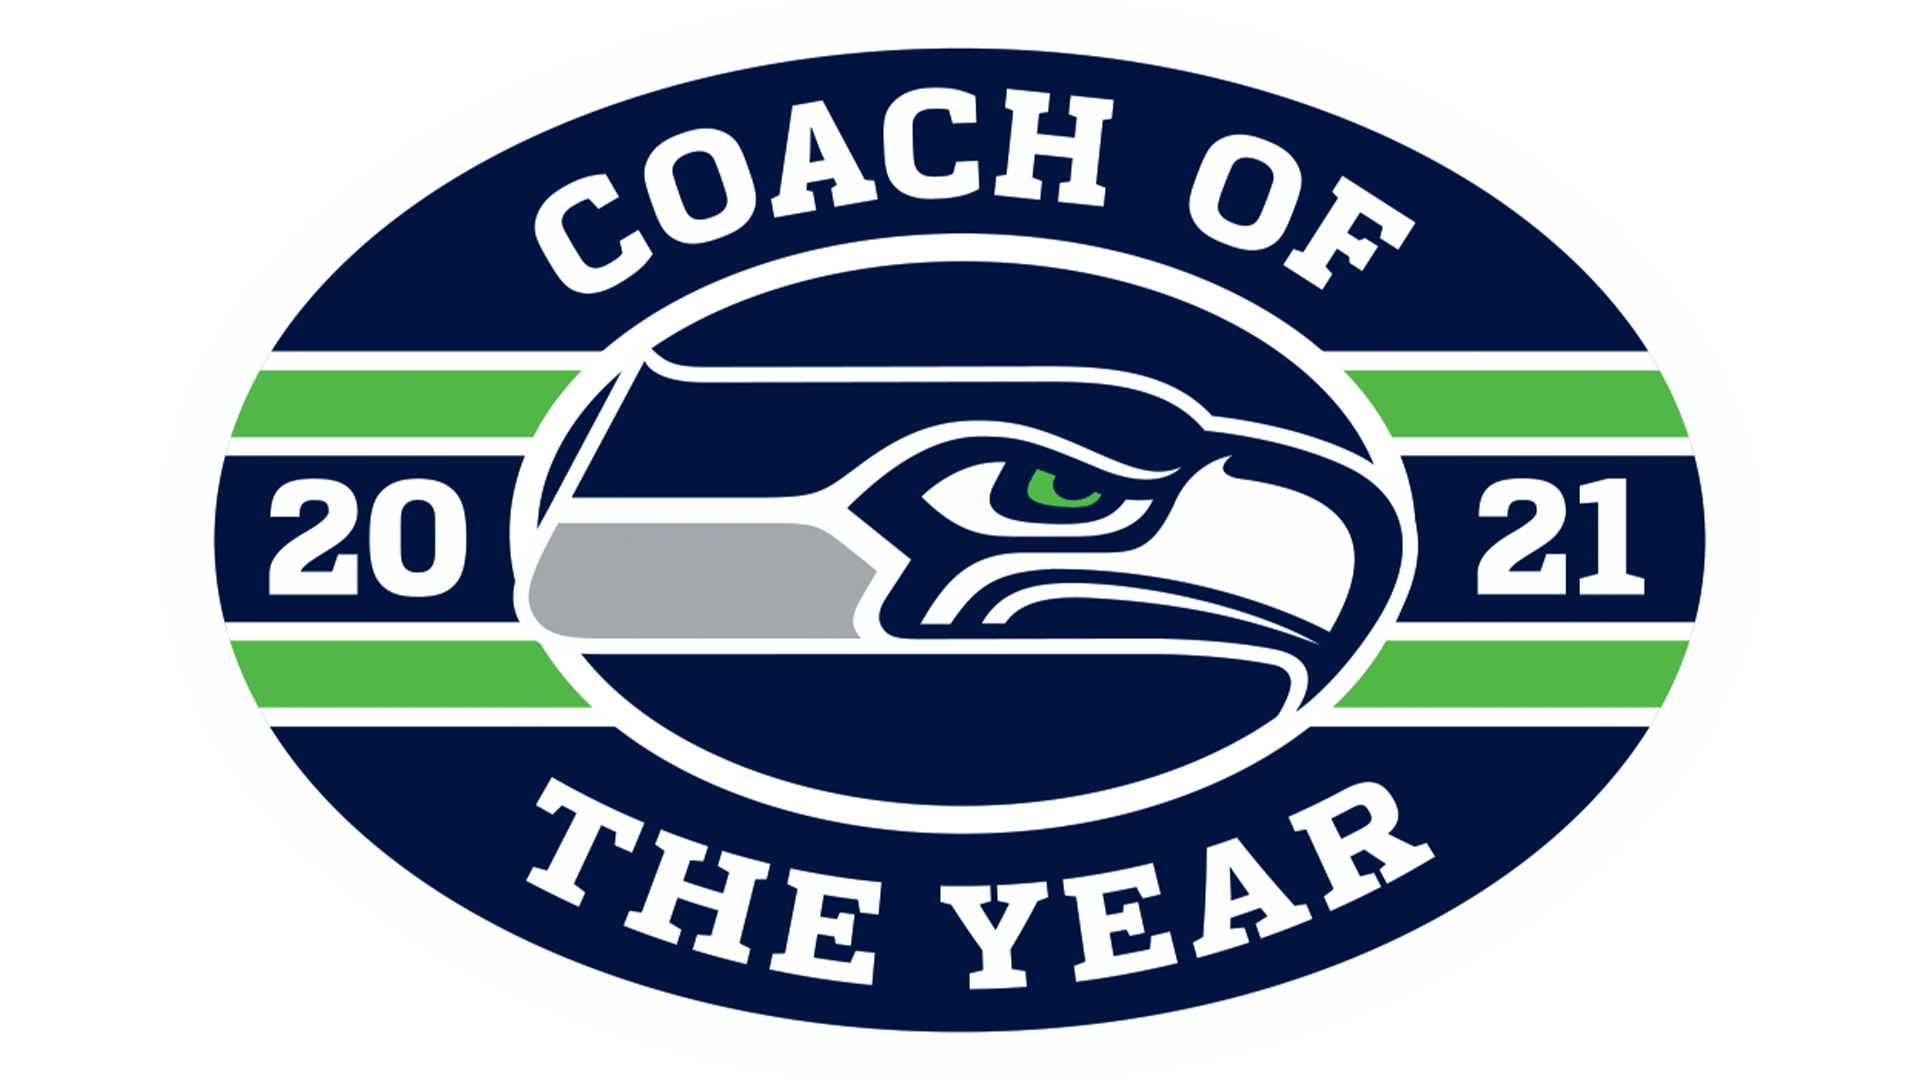 211227-coach-of-the-year-logo